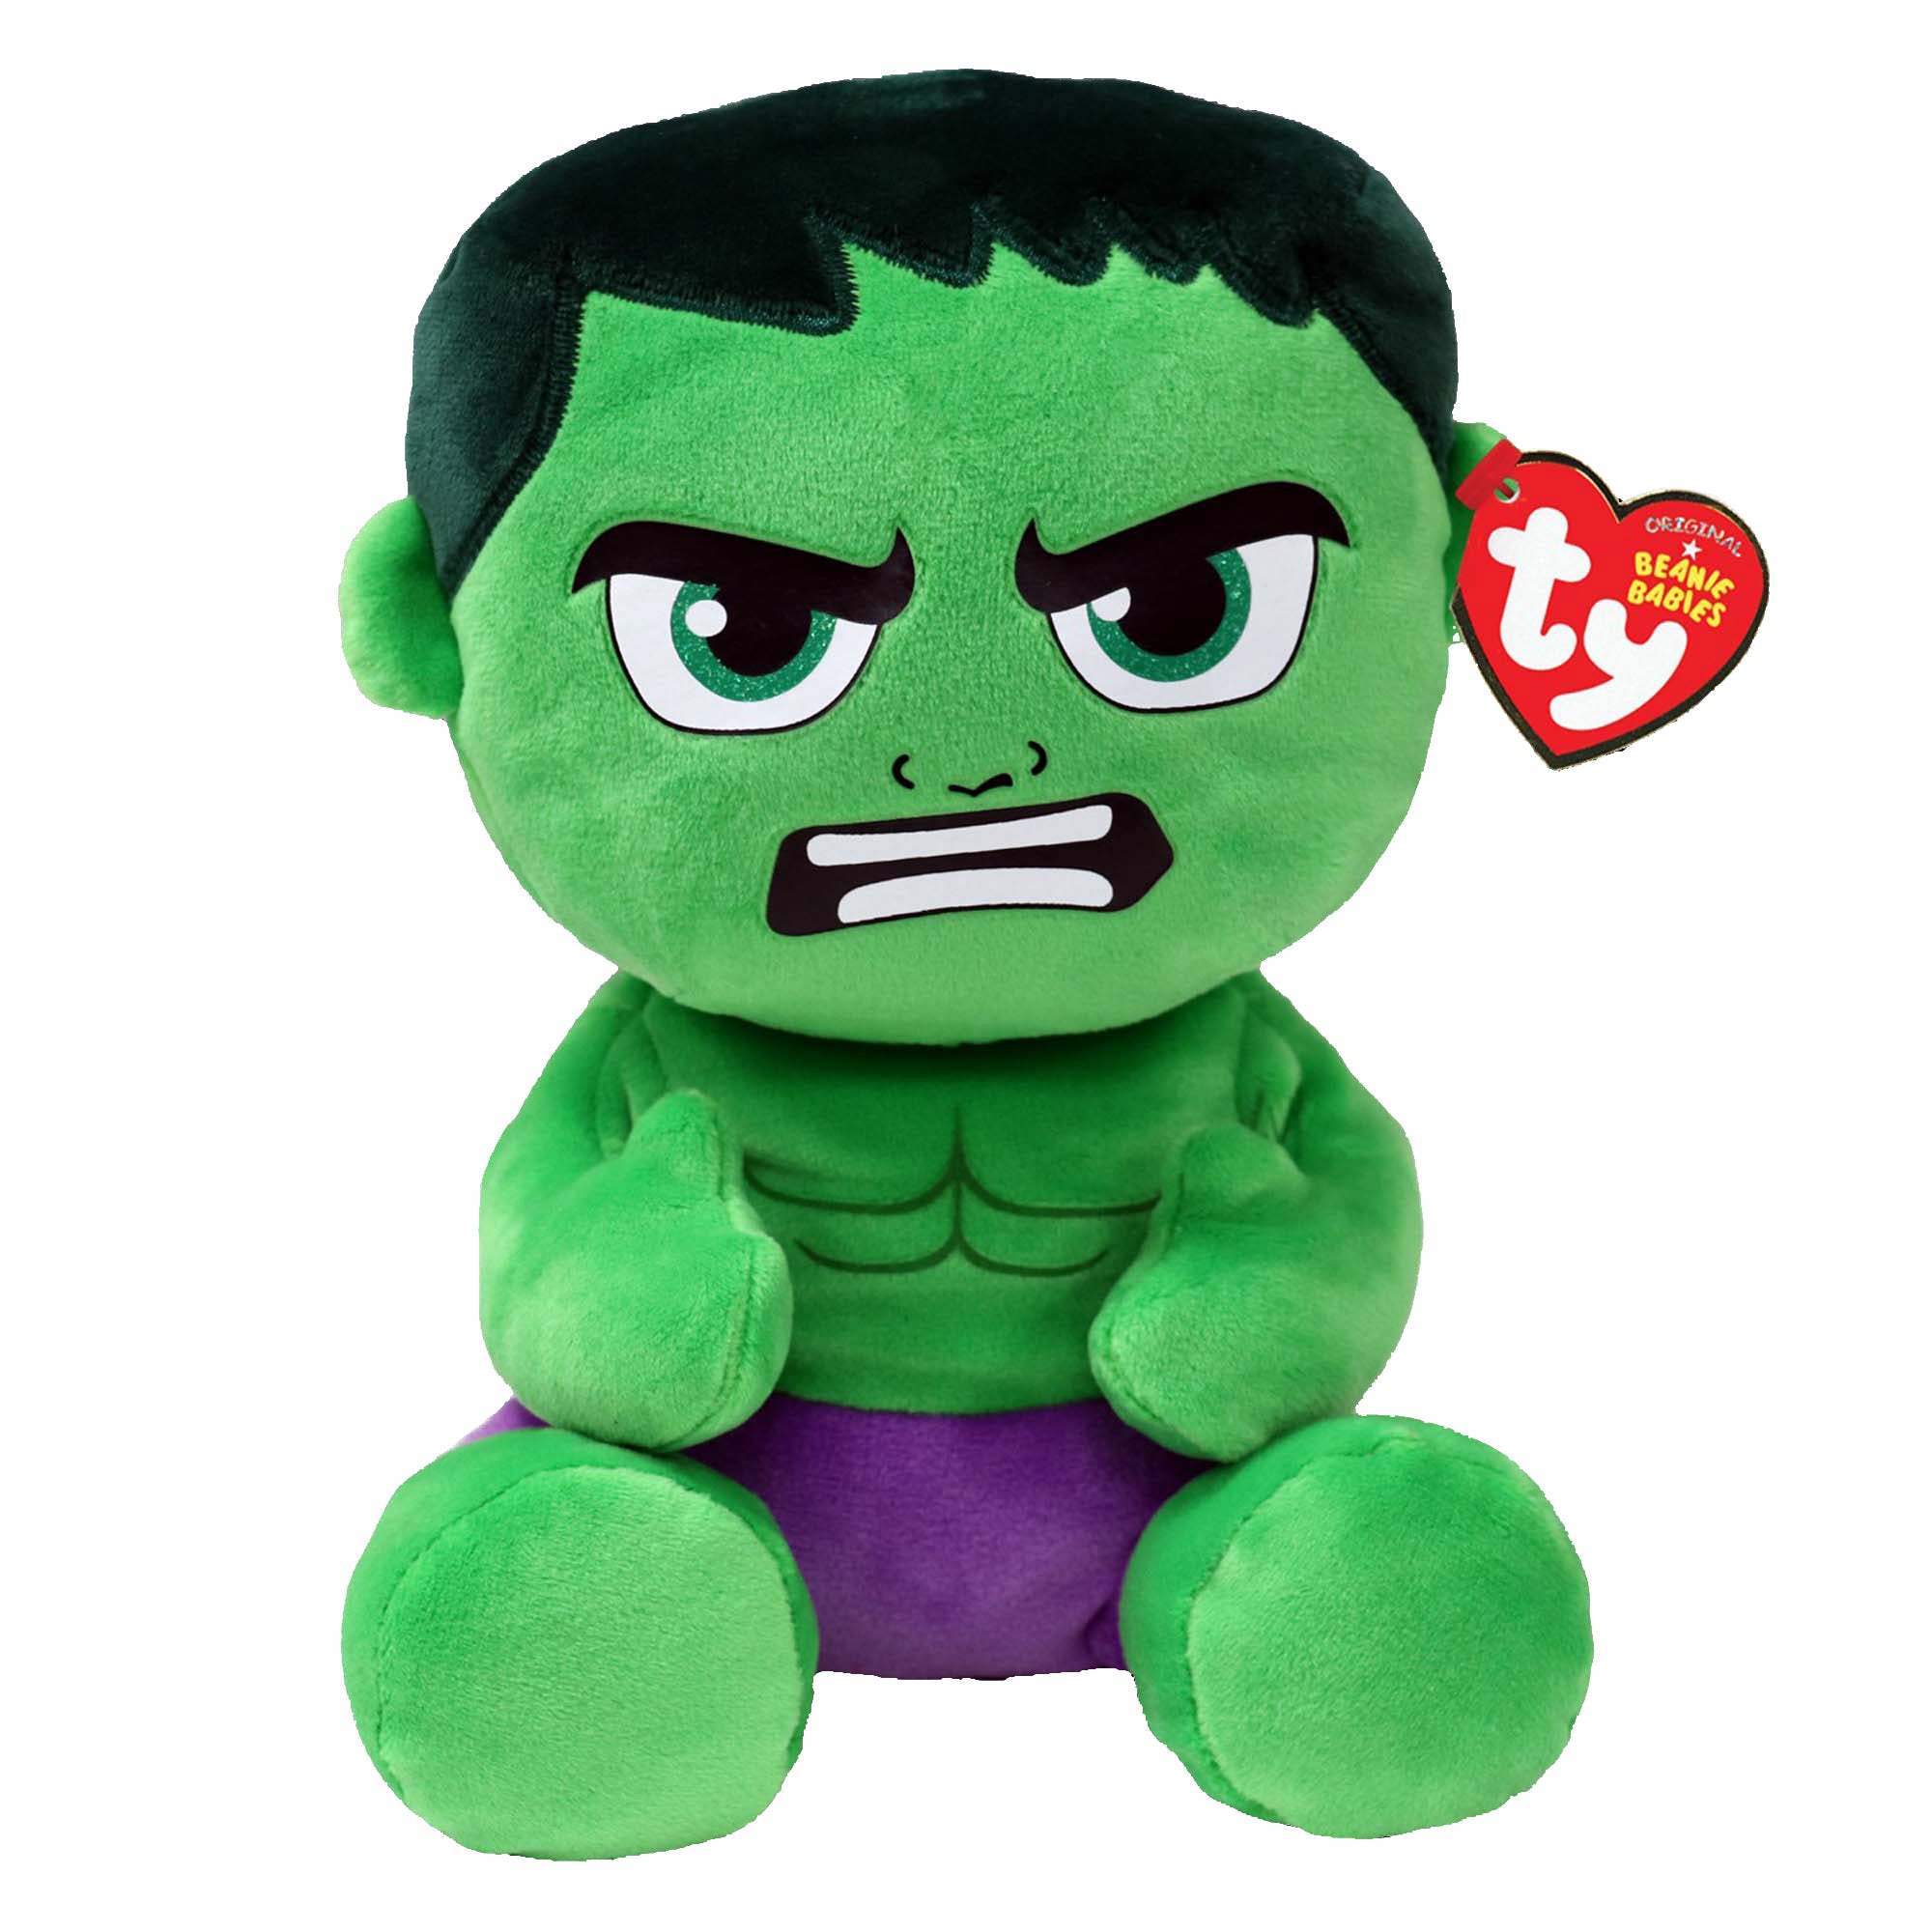 TY Marvel Soft Plush, Hulk, 13 Inches, 1 Count